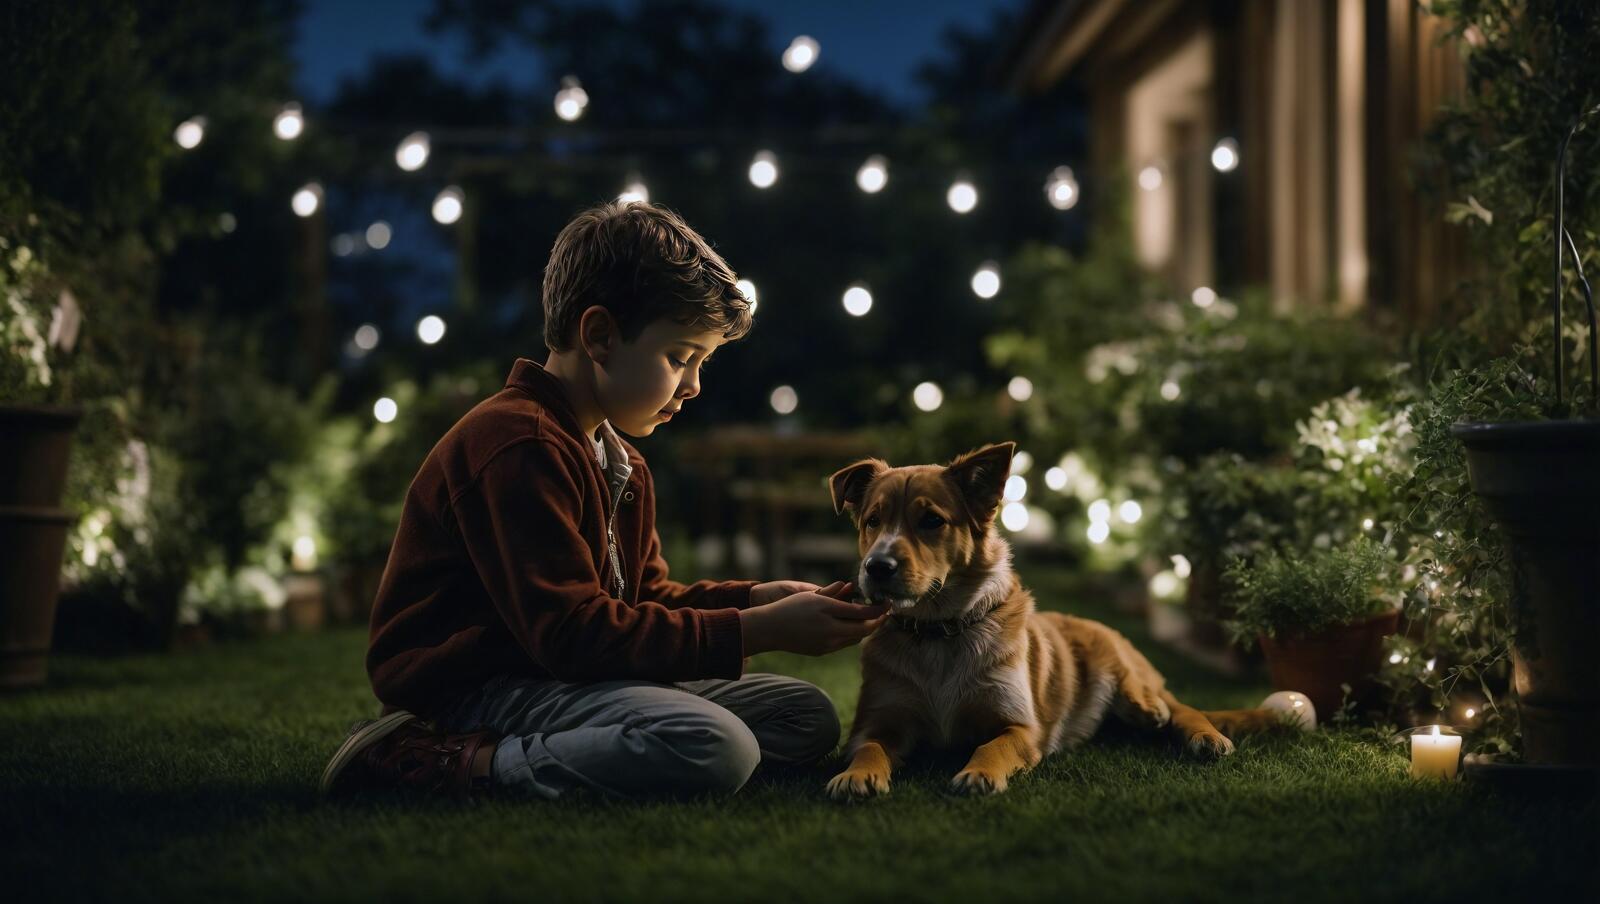 Free photo A boy is sitting in the garden holding a dog